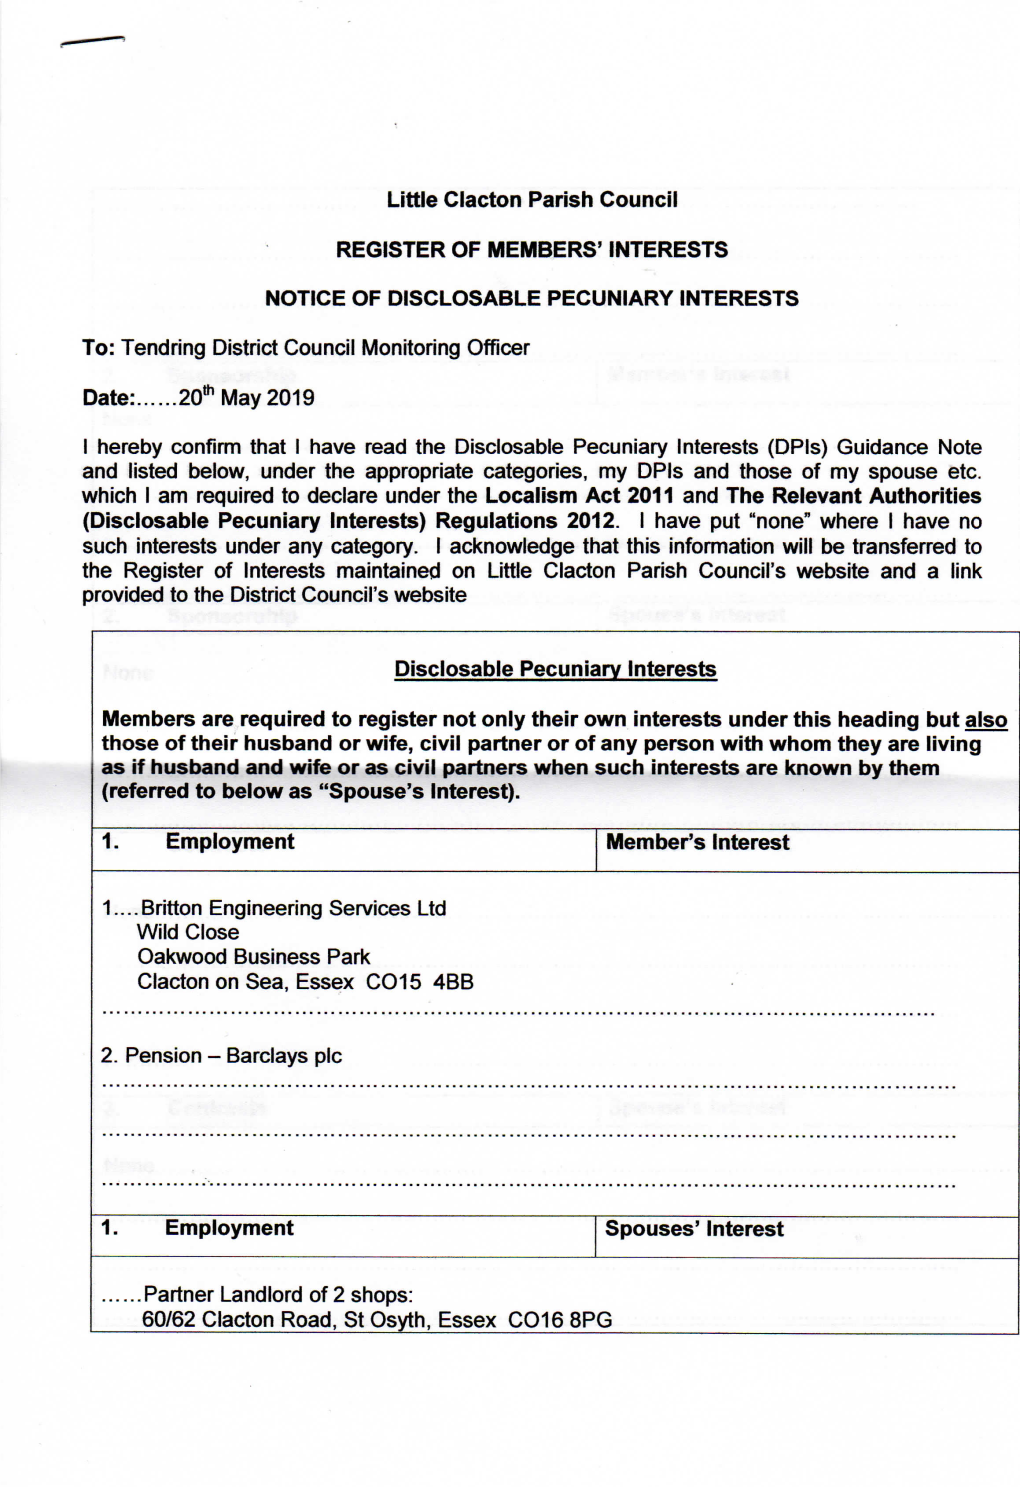 Tendring District Council Monitoring Officer